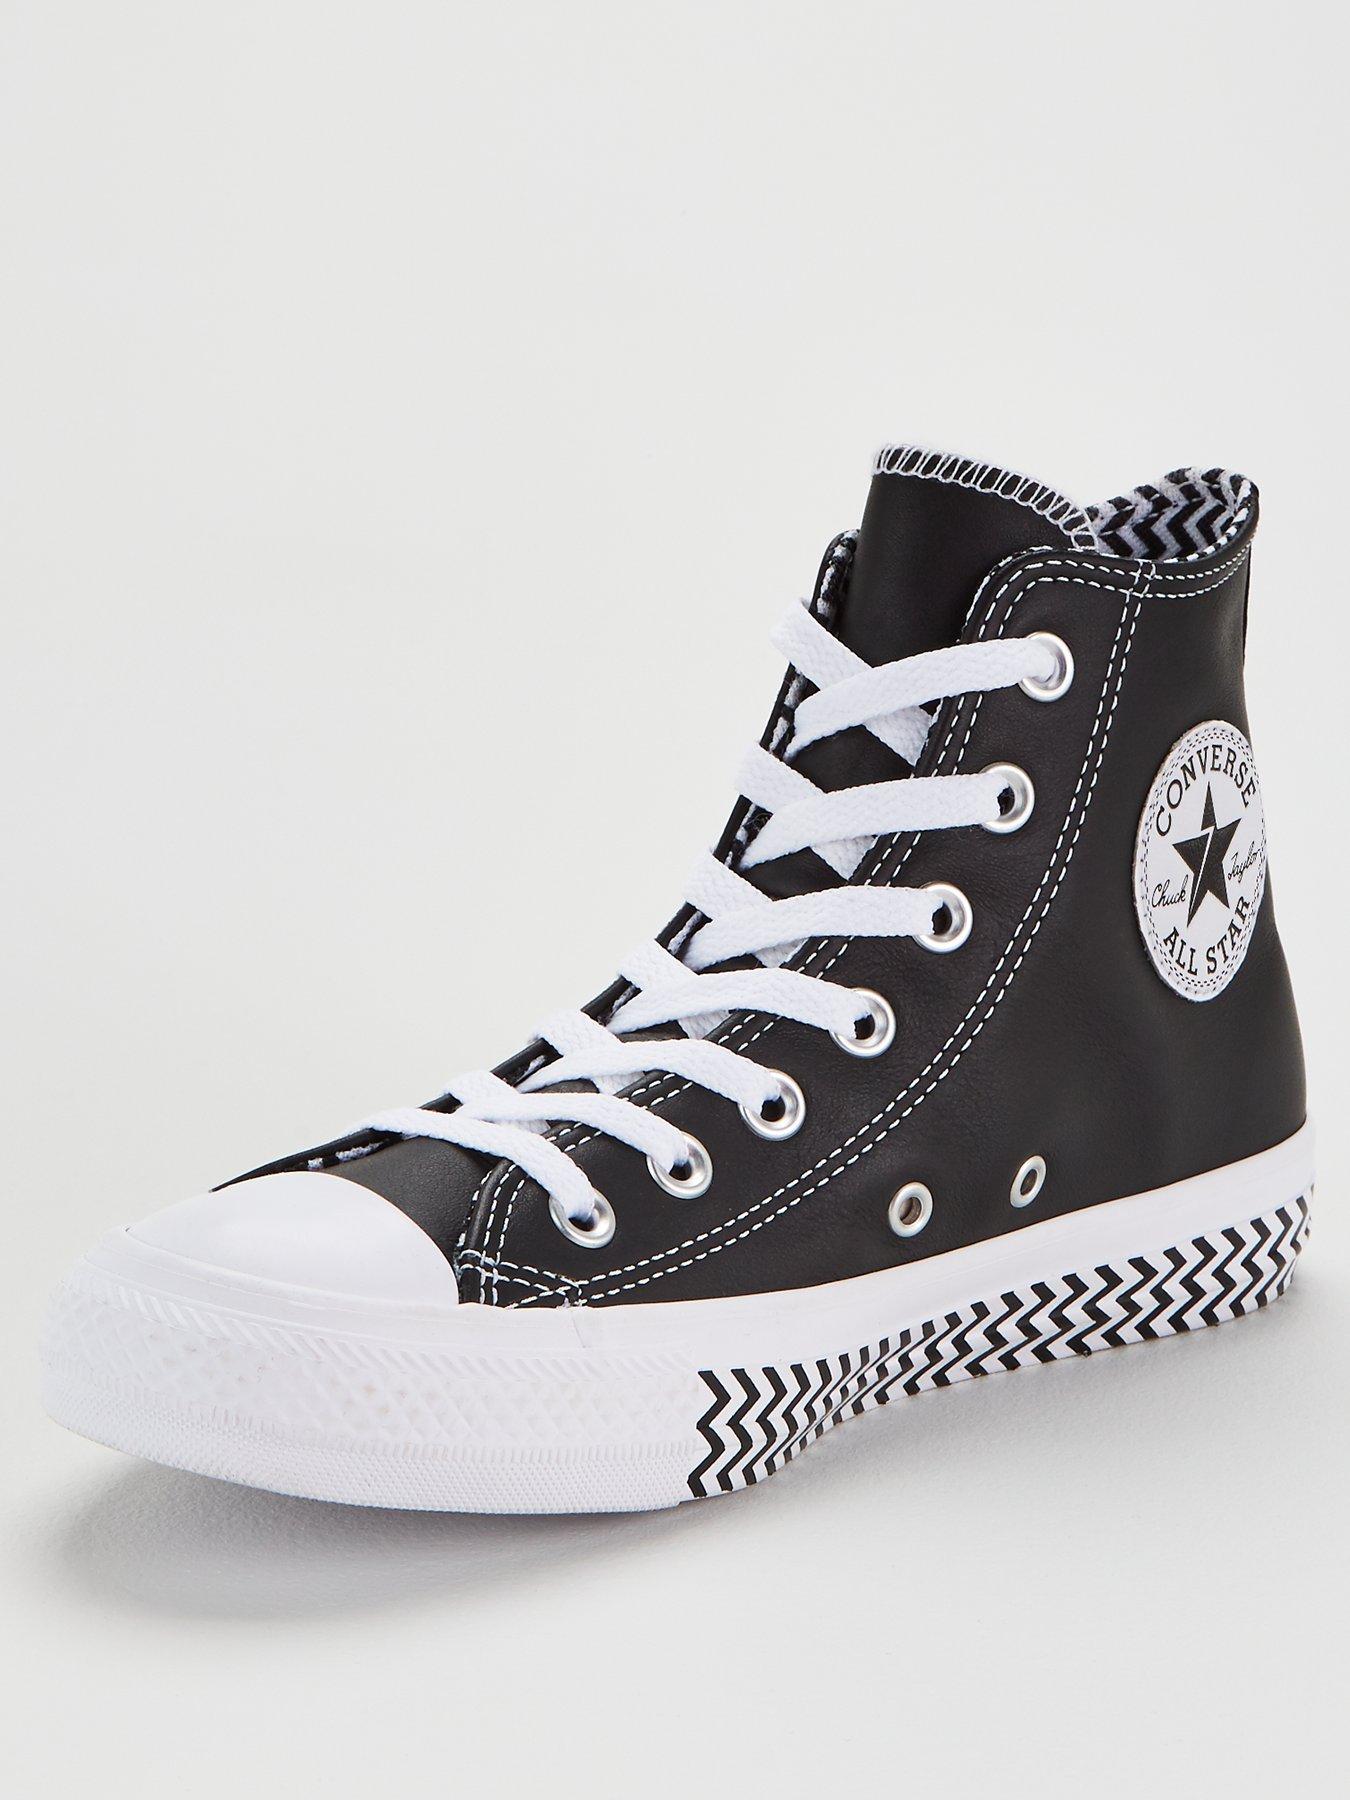 Converse Chuck Taylor All Star VLTG Leather High Top - Black/White |  very.co.uk